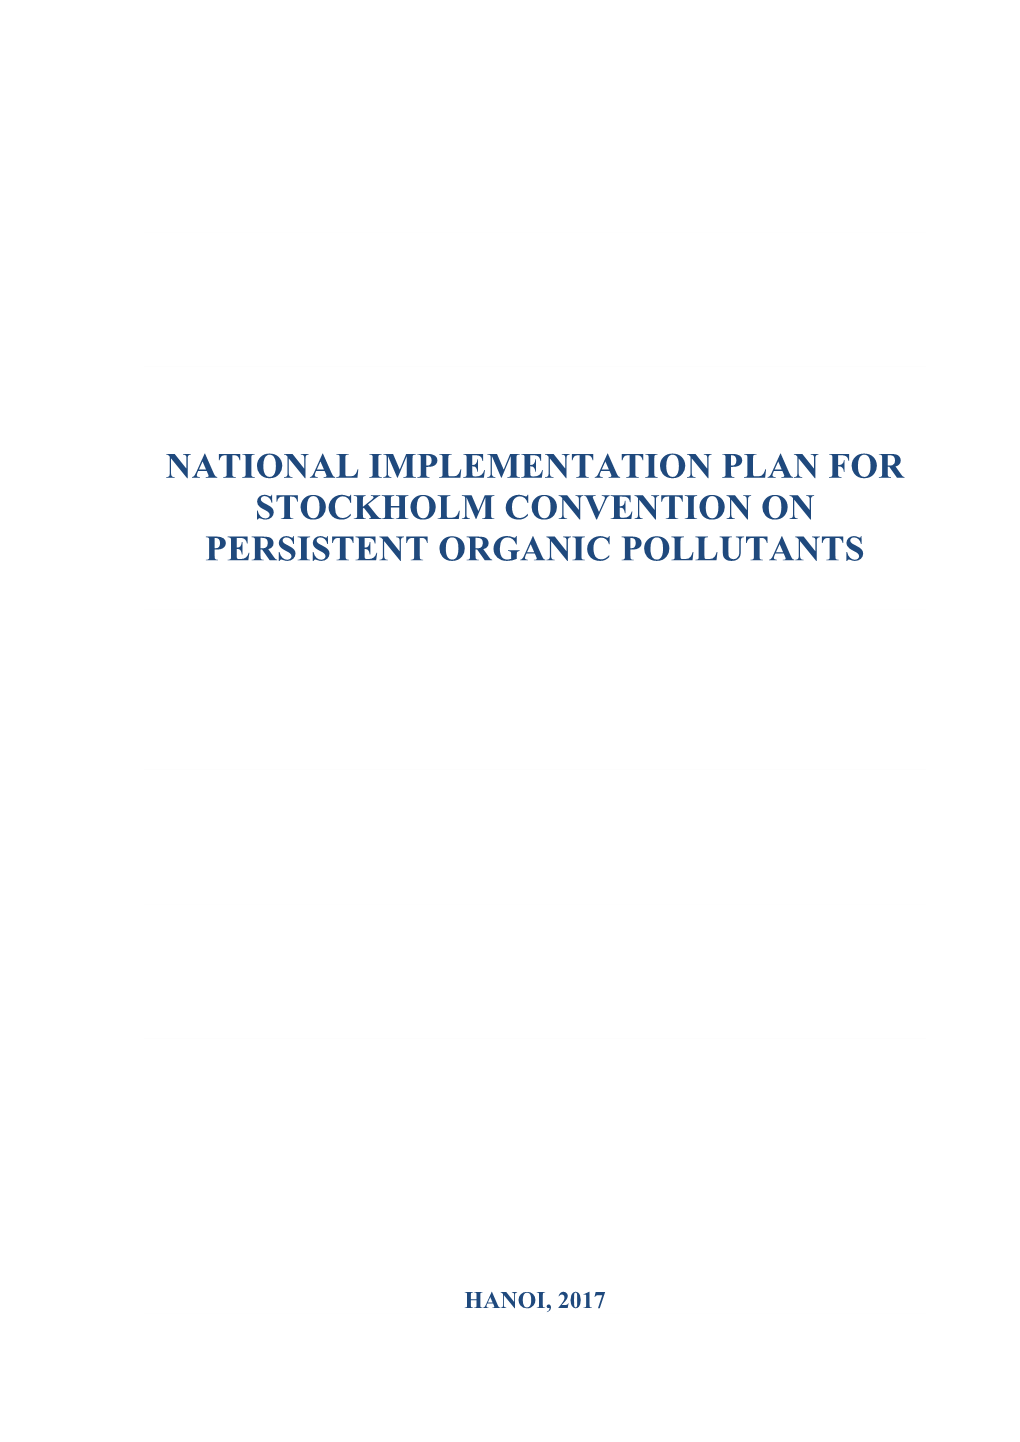 National Implementation Plan for Stockholm Convention on Persistent Organic Pollutants